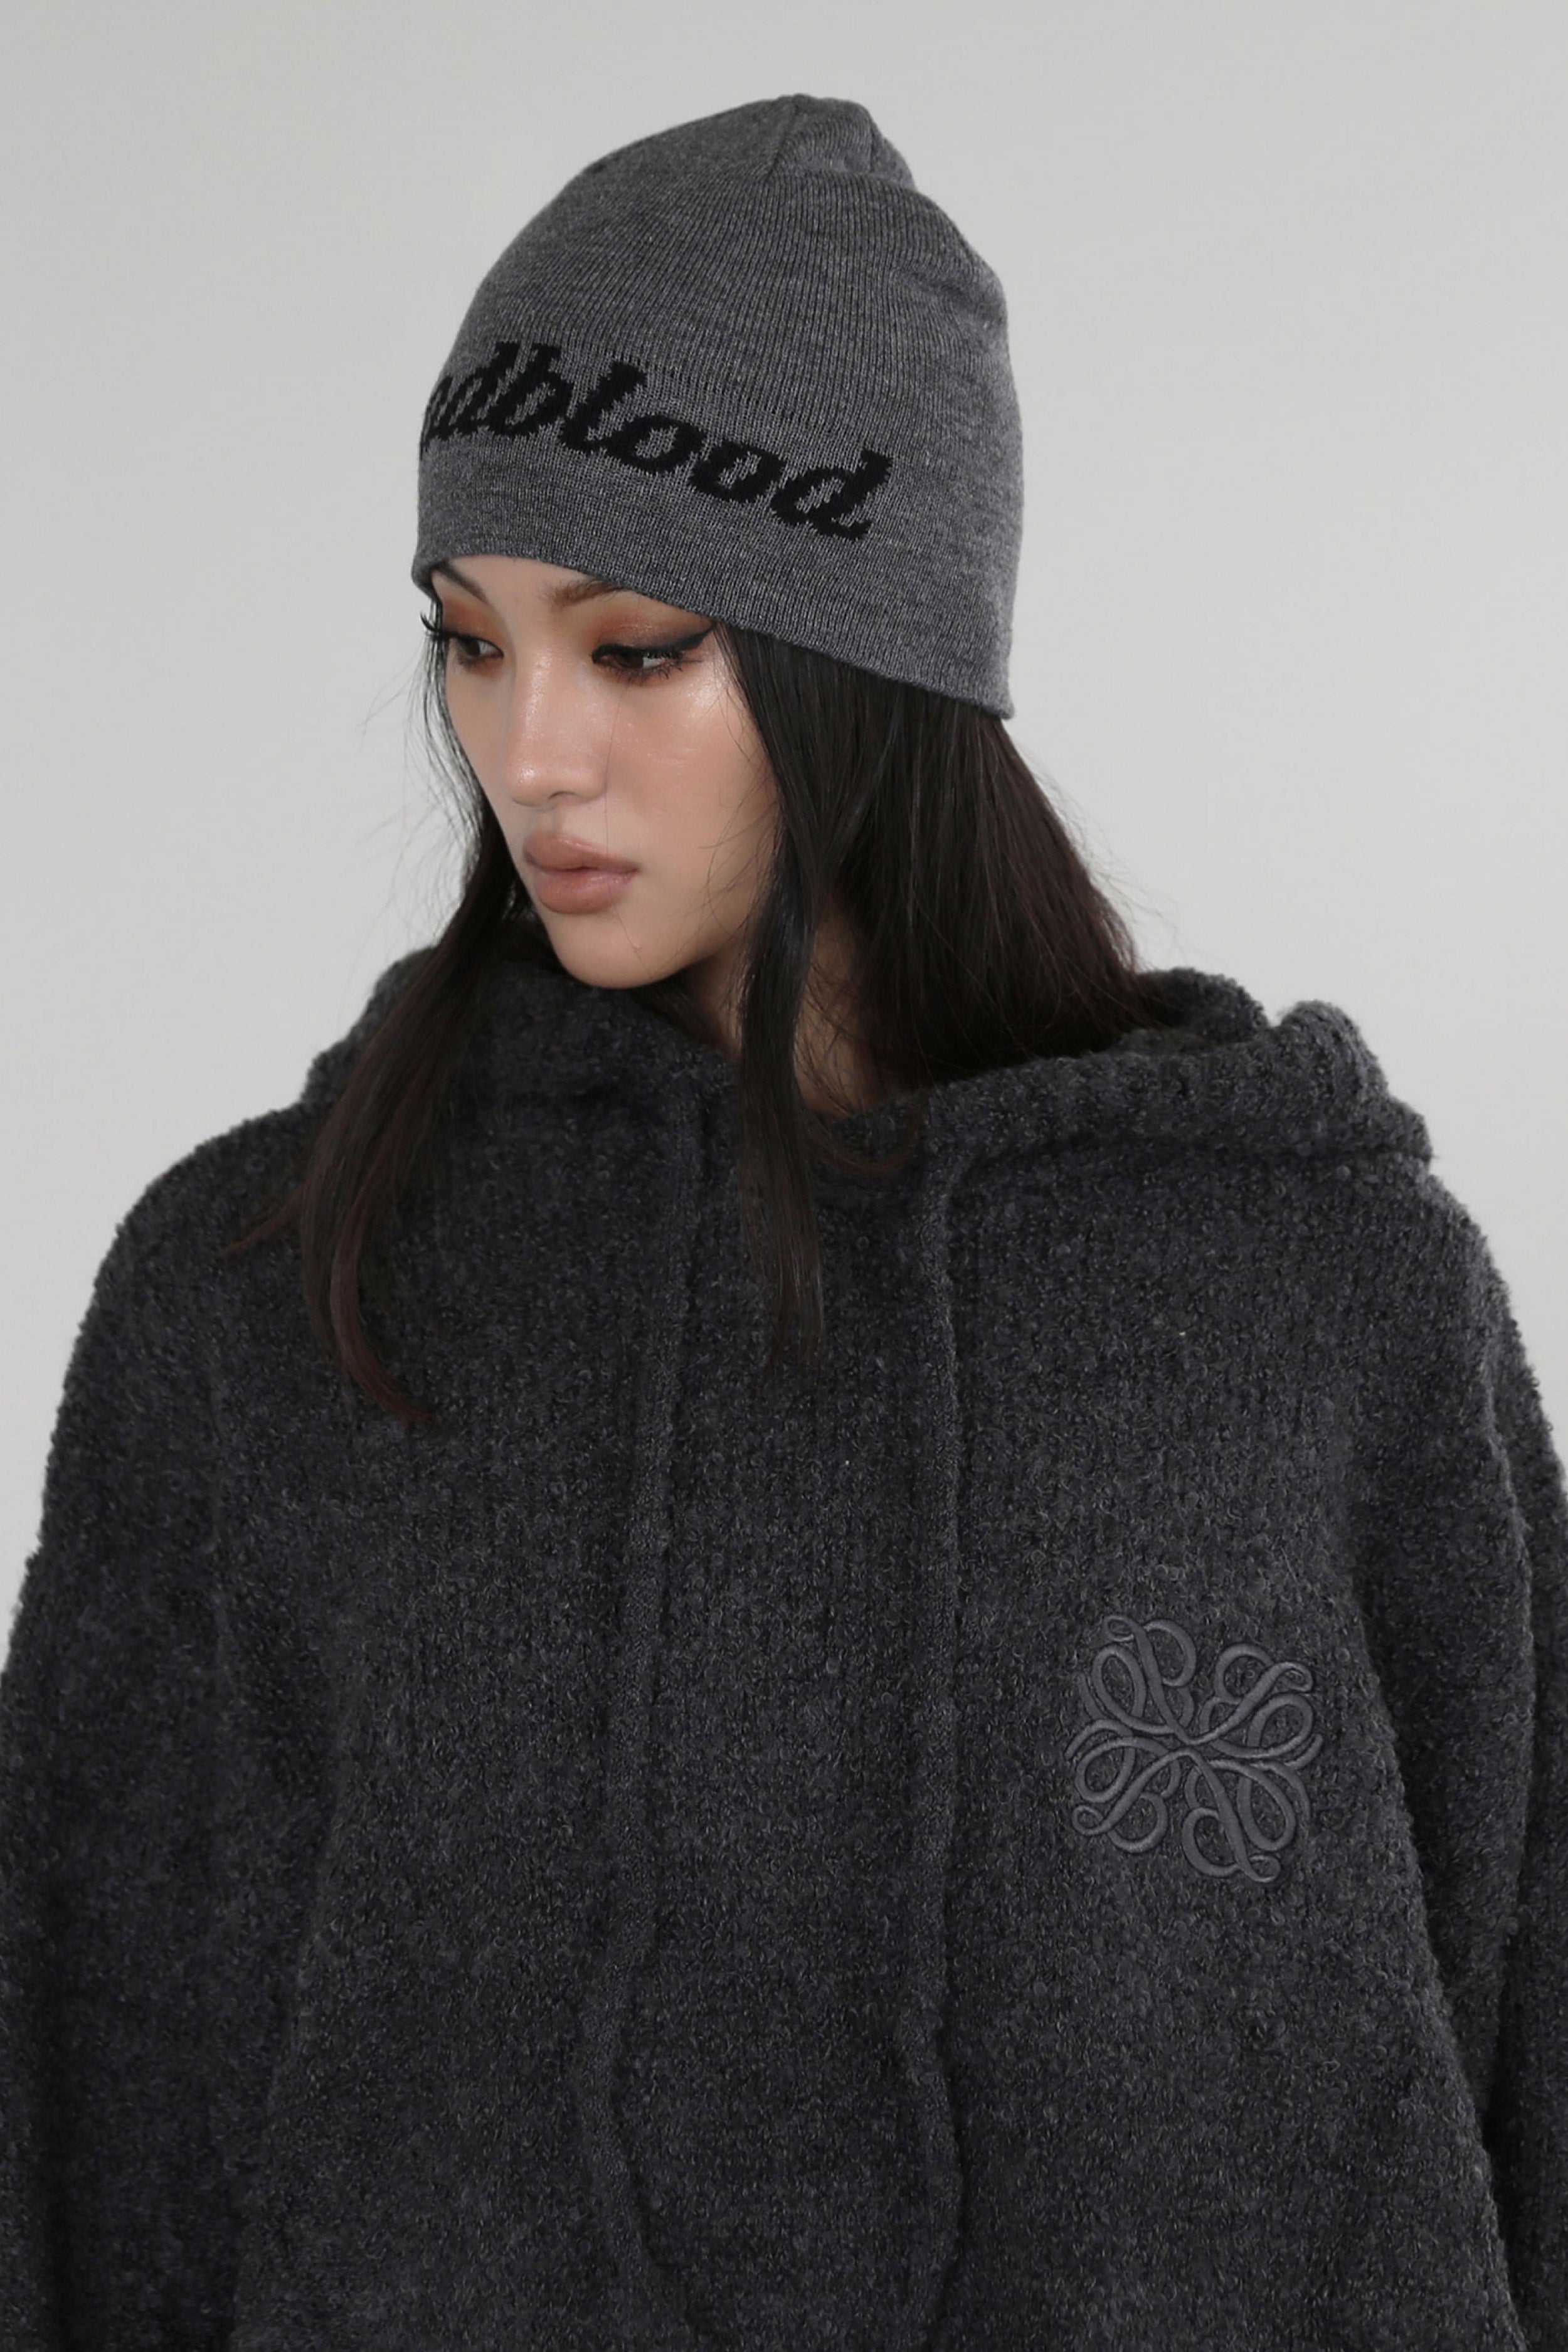 Badblood Signature Lettering Beanie Gray